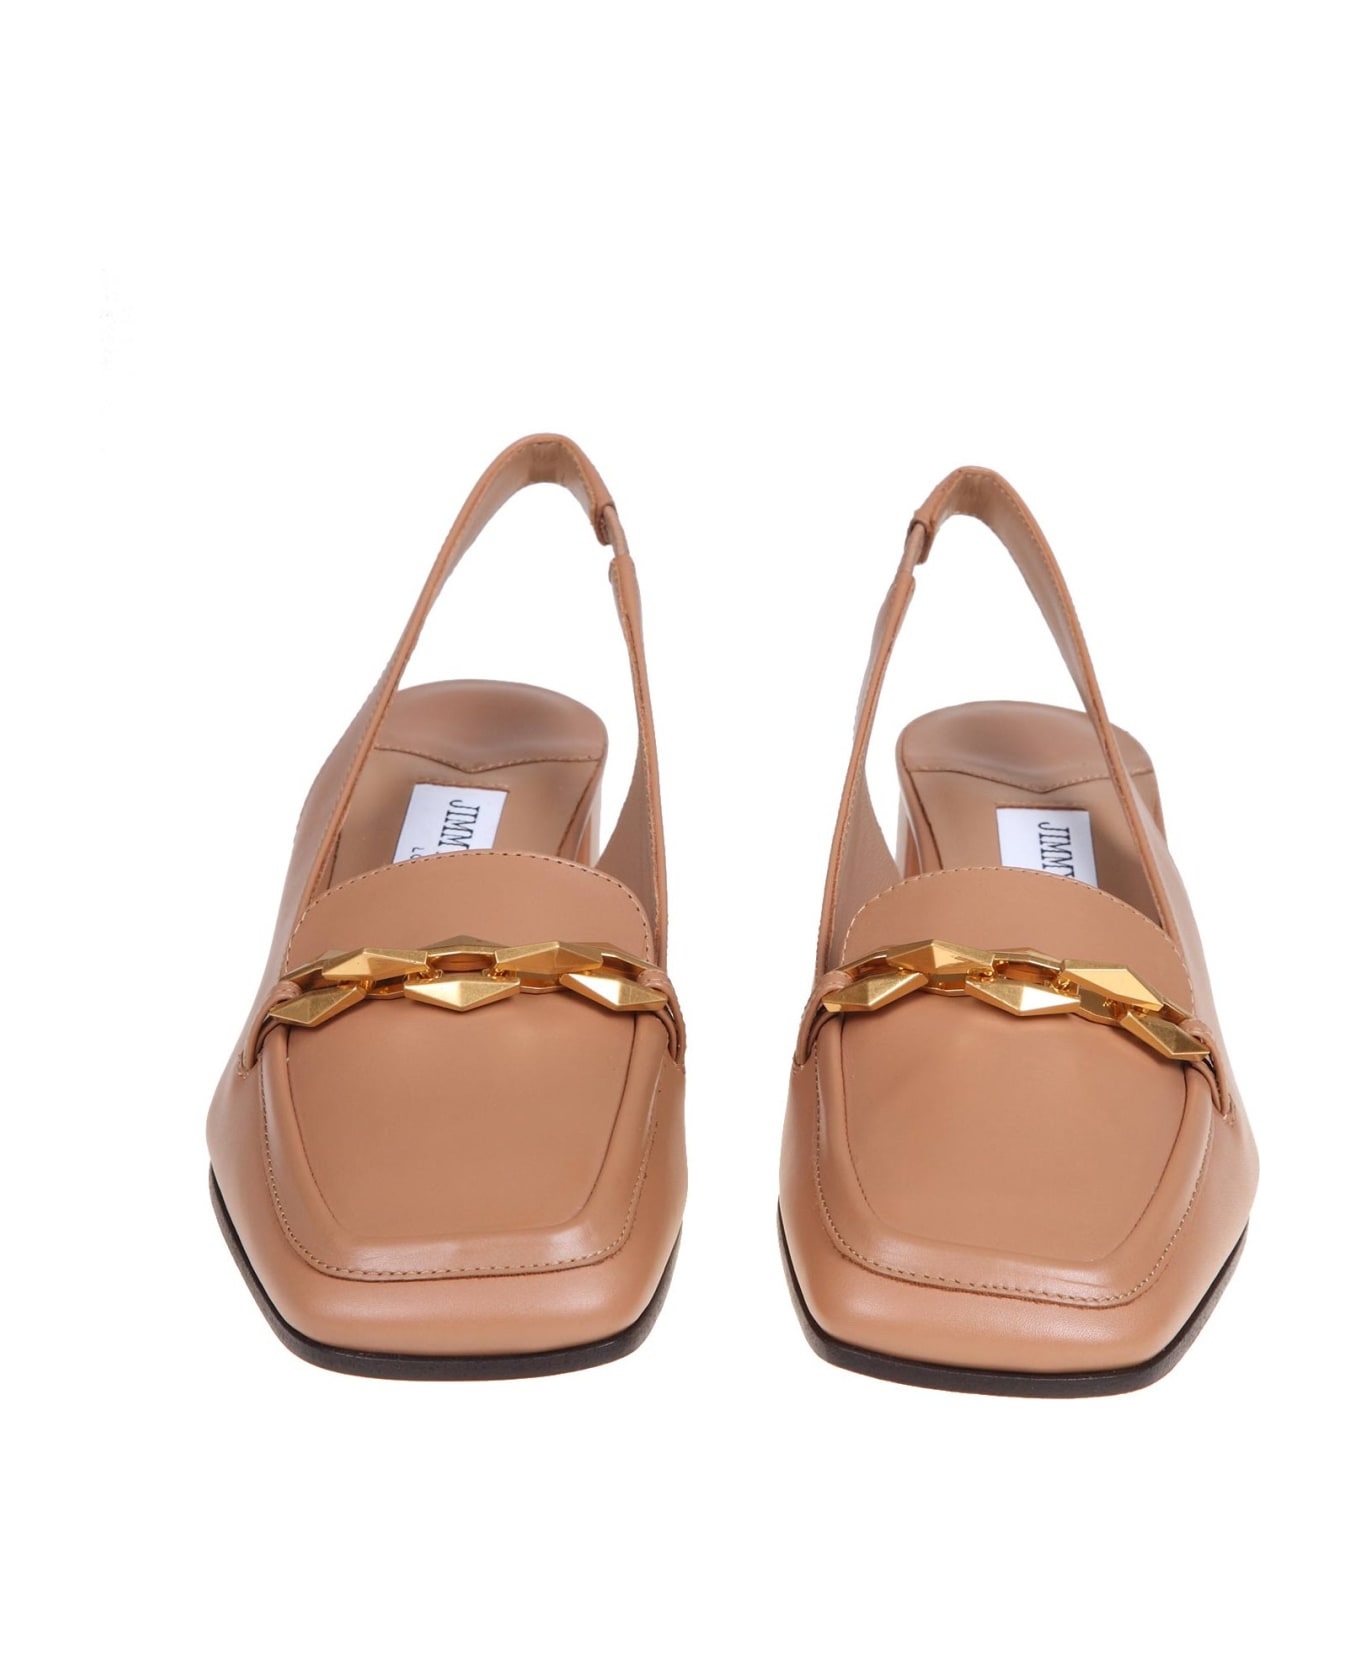 Jimmy Choo Pumps Slingback In Biscuit Color Leather - Biscuit ハイヒール